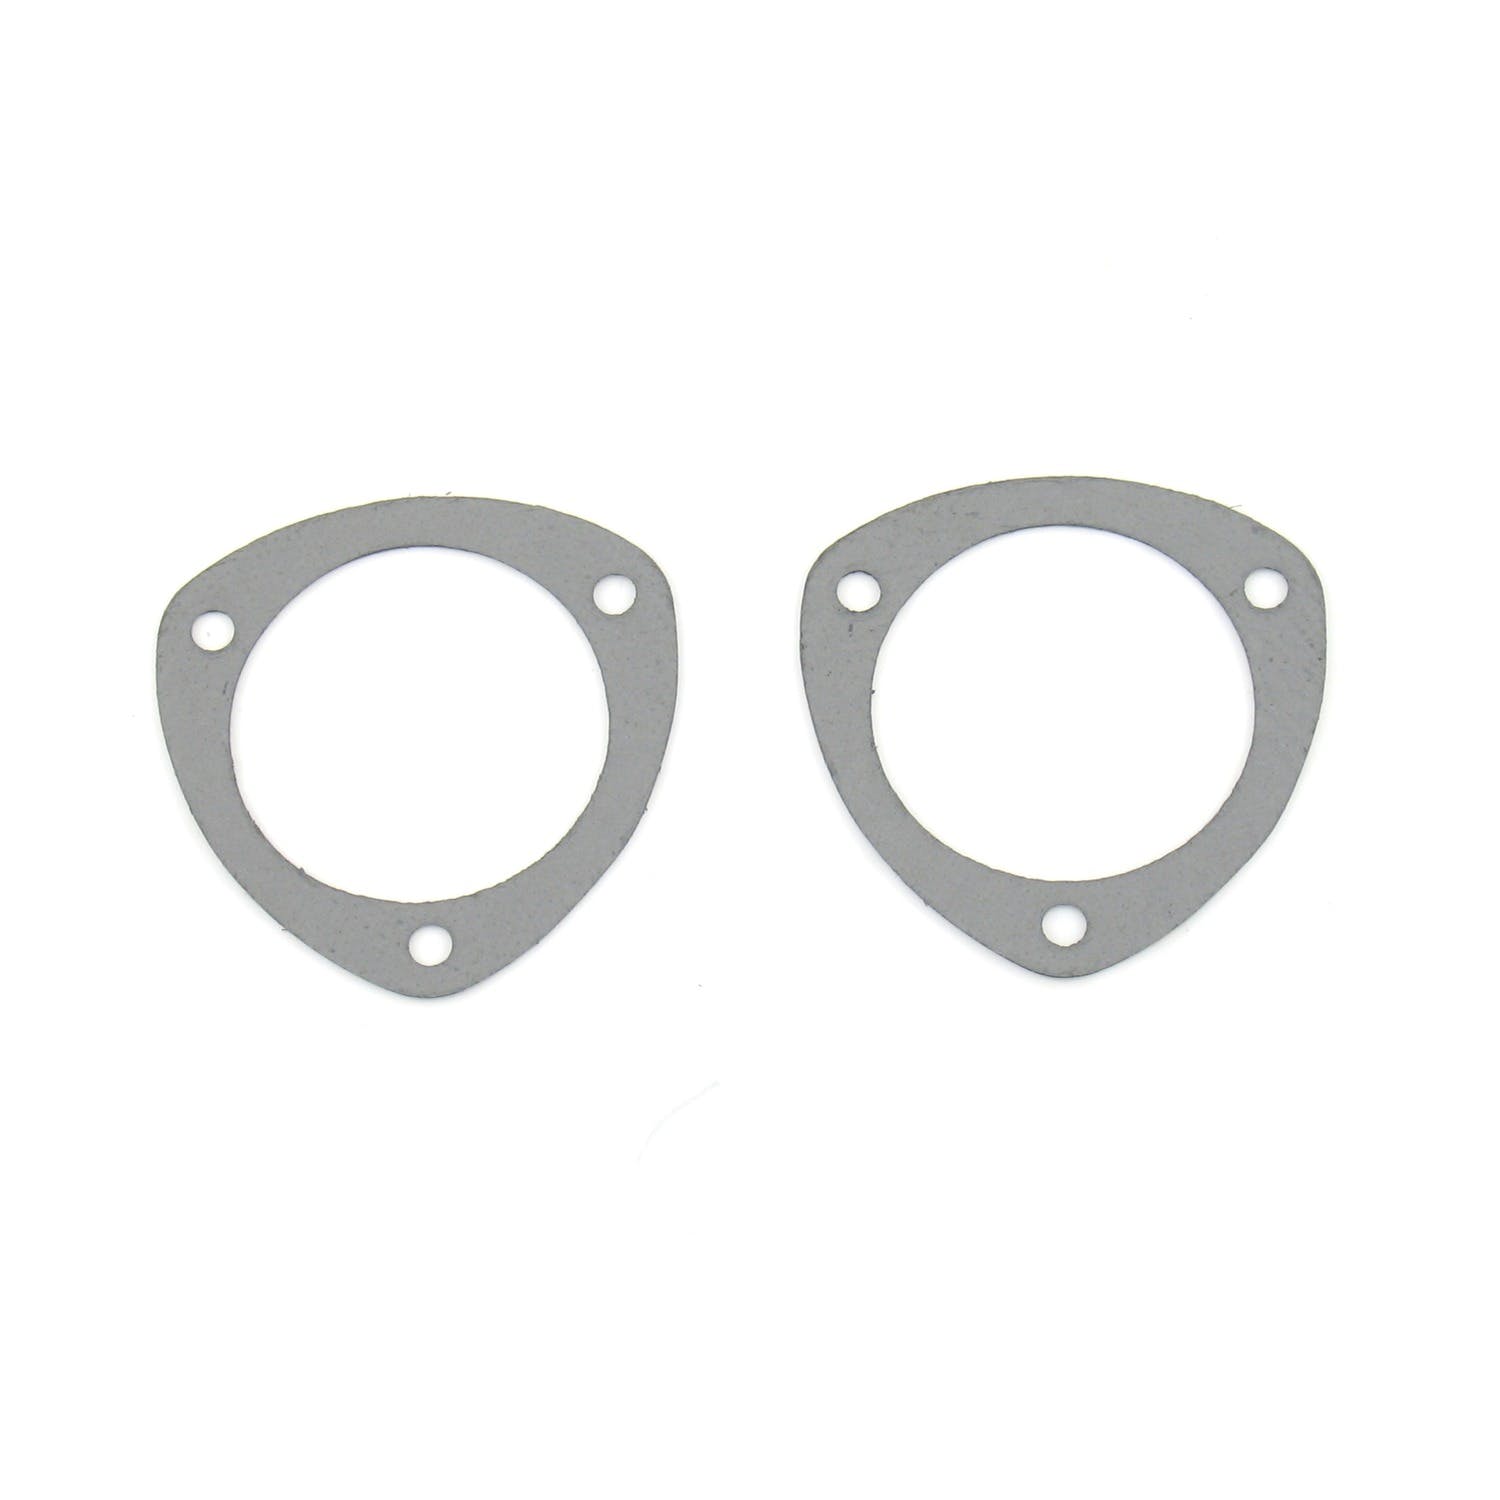 Patriot Exhaust H7951 3 1/2 inch Collector Gasket Universal Pair